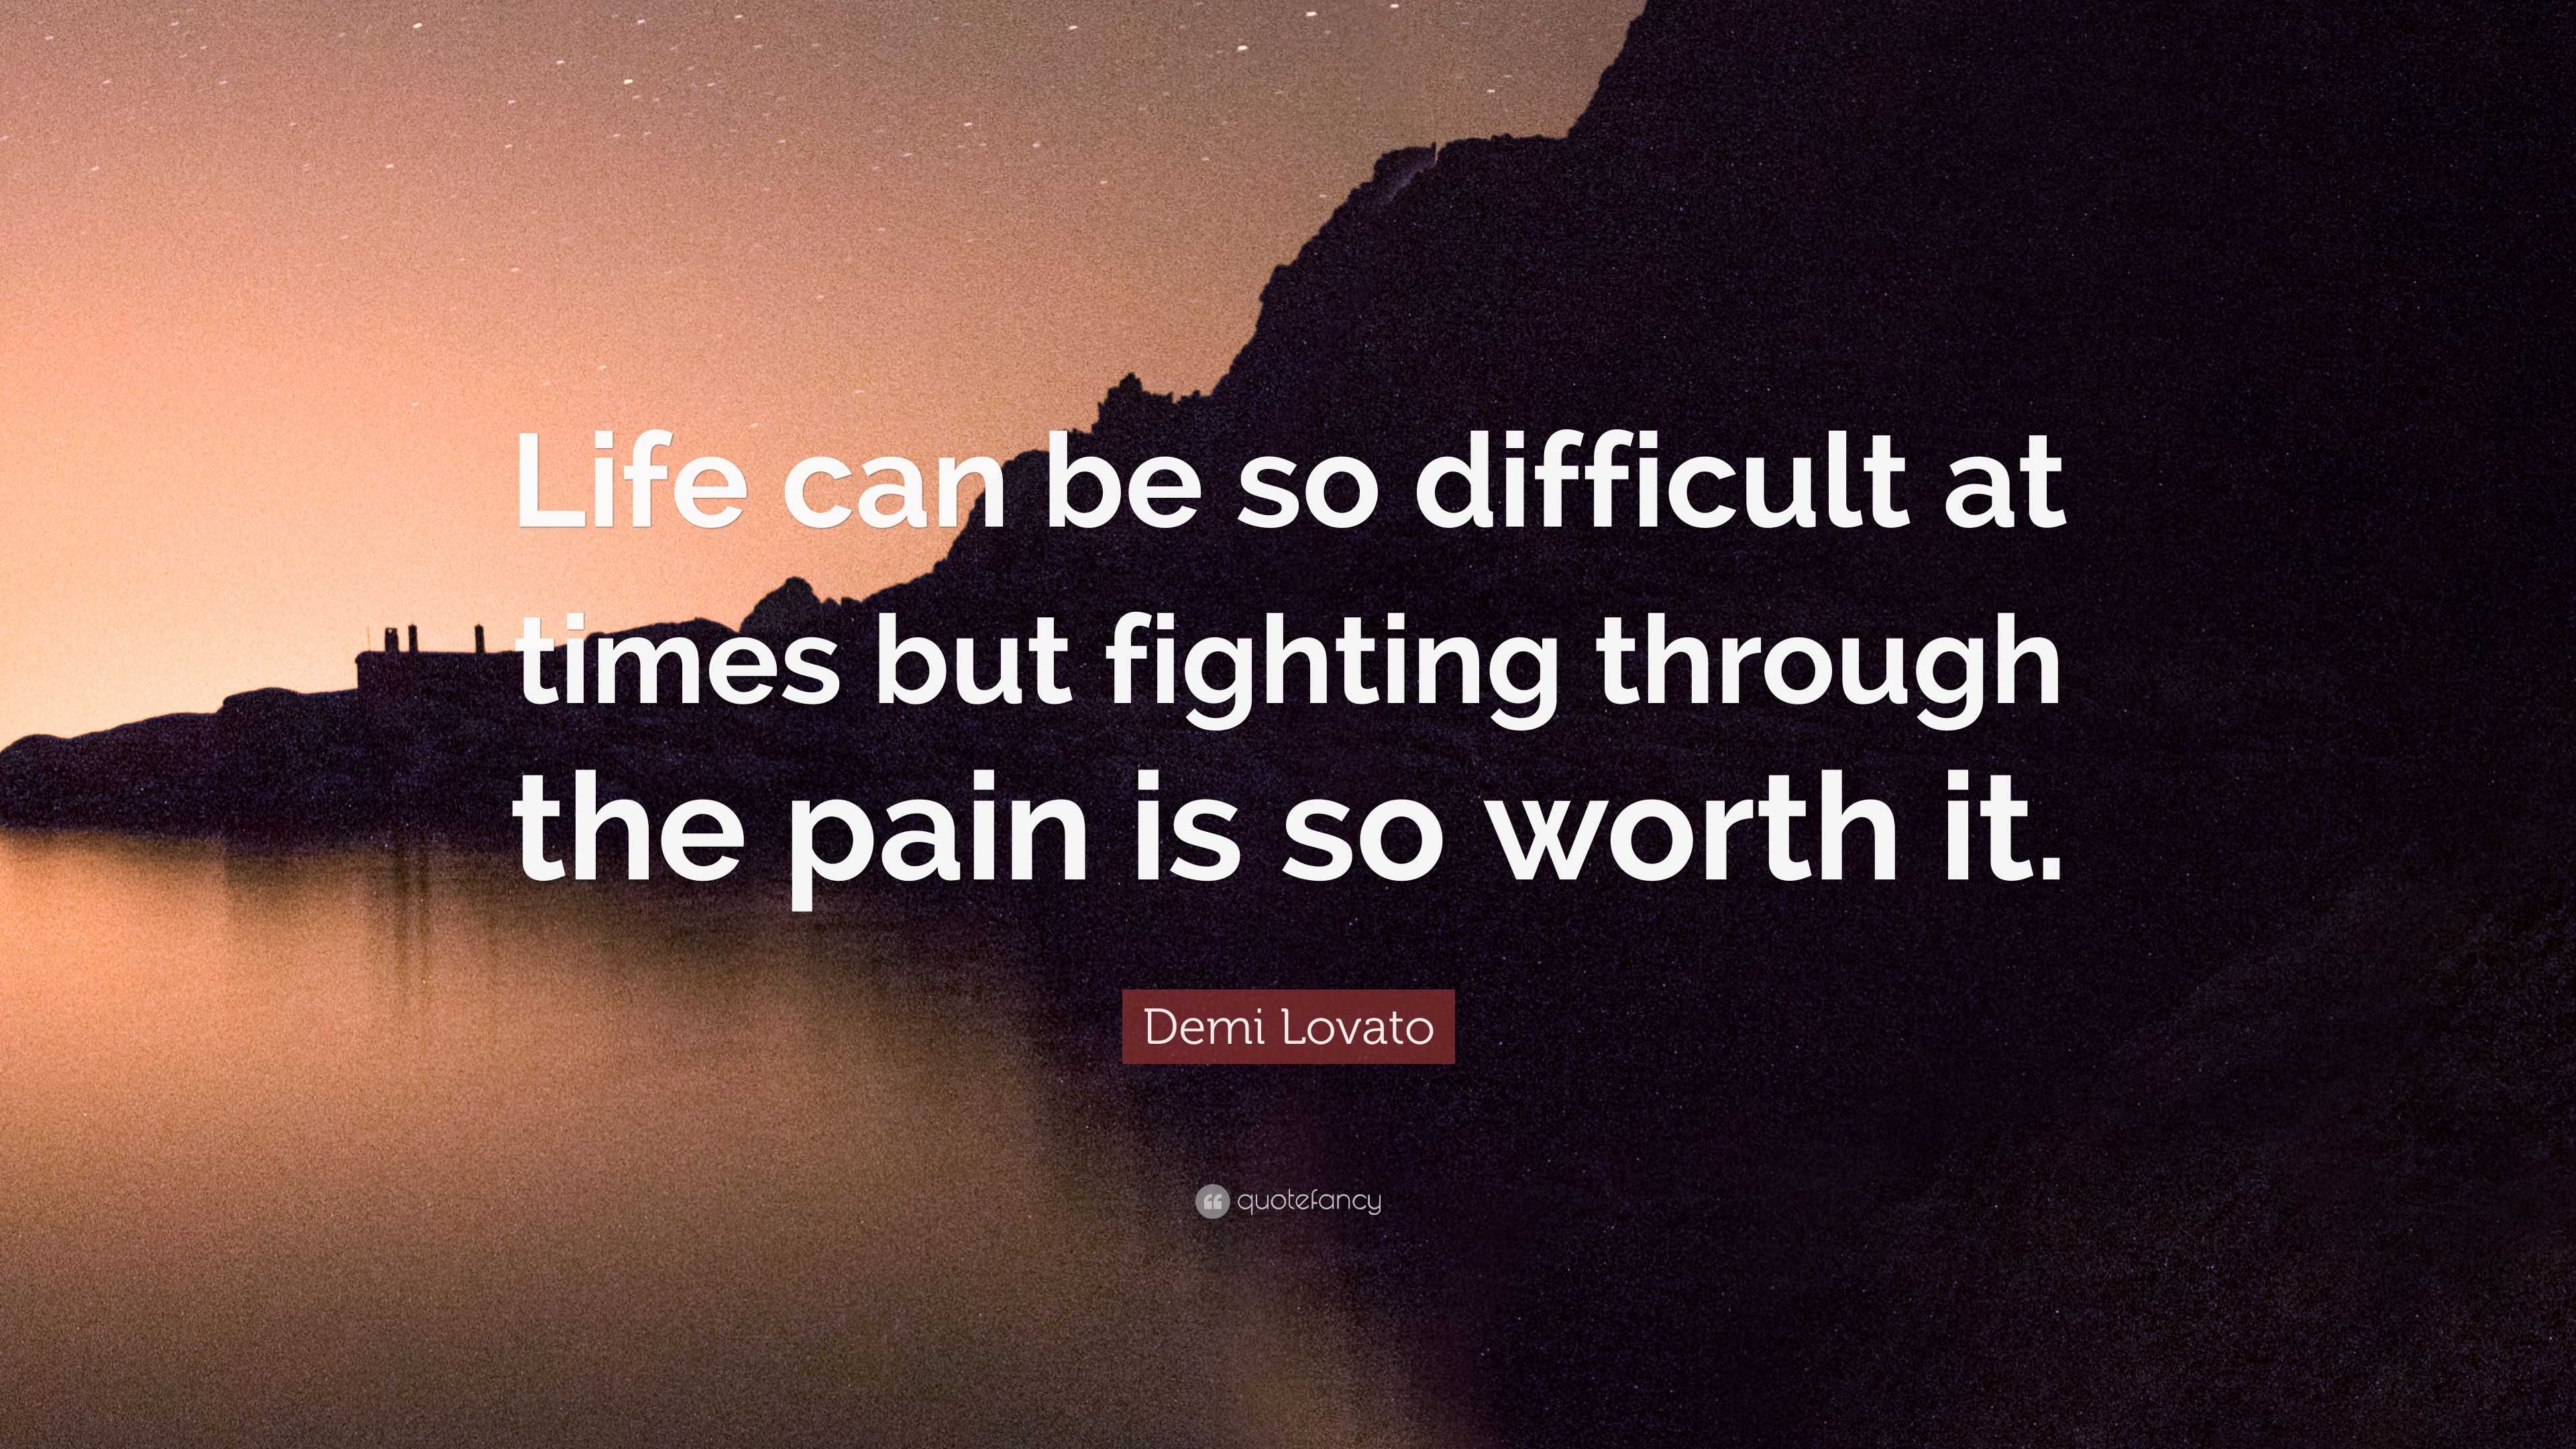 Demi Lovato Quote: "Life can be so difficult at times but ...